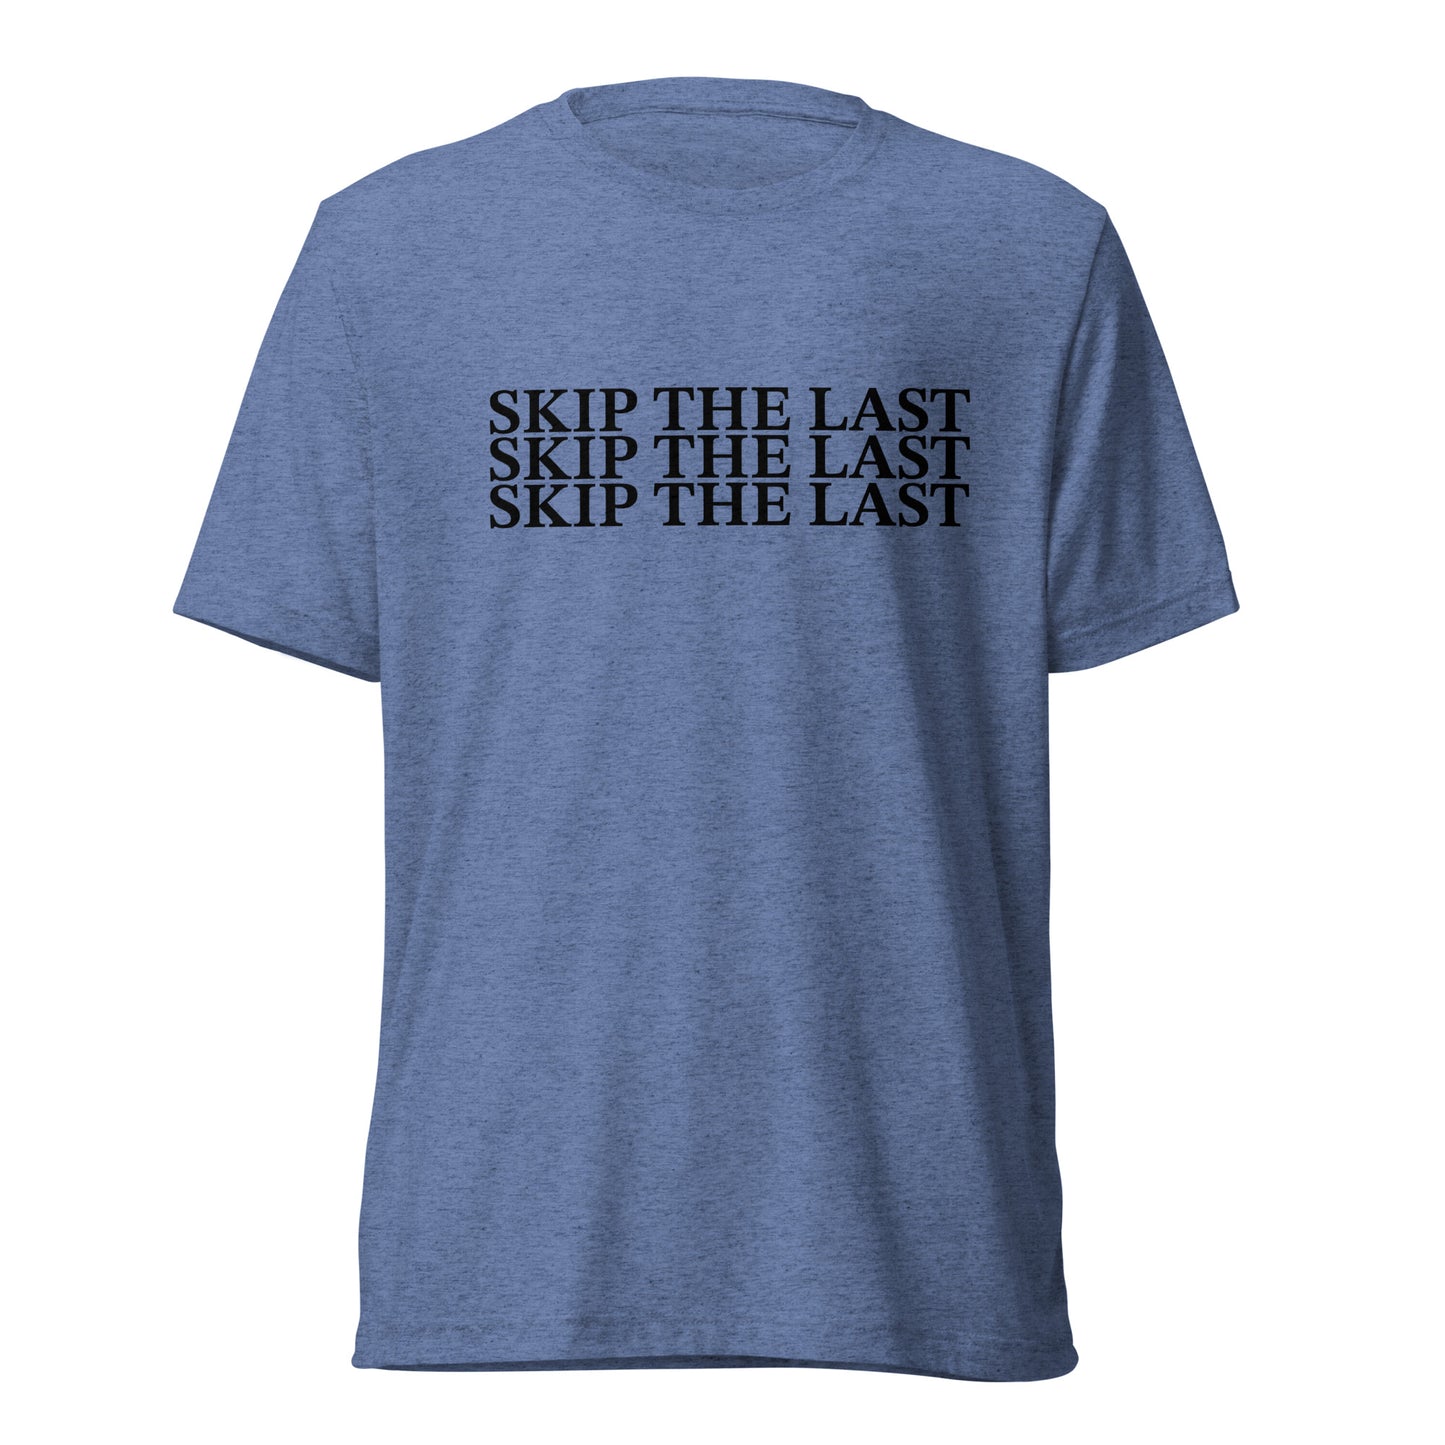 Two More Skip The Last "Skip the Last x3" blue unisex tri-blend t-shirt. Front view